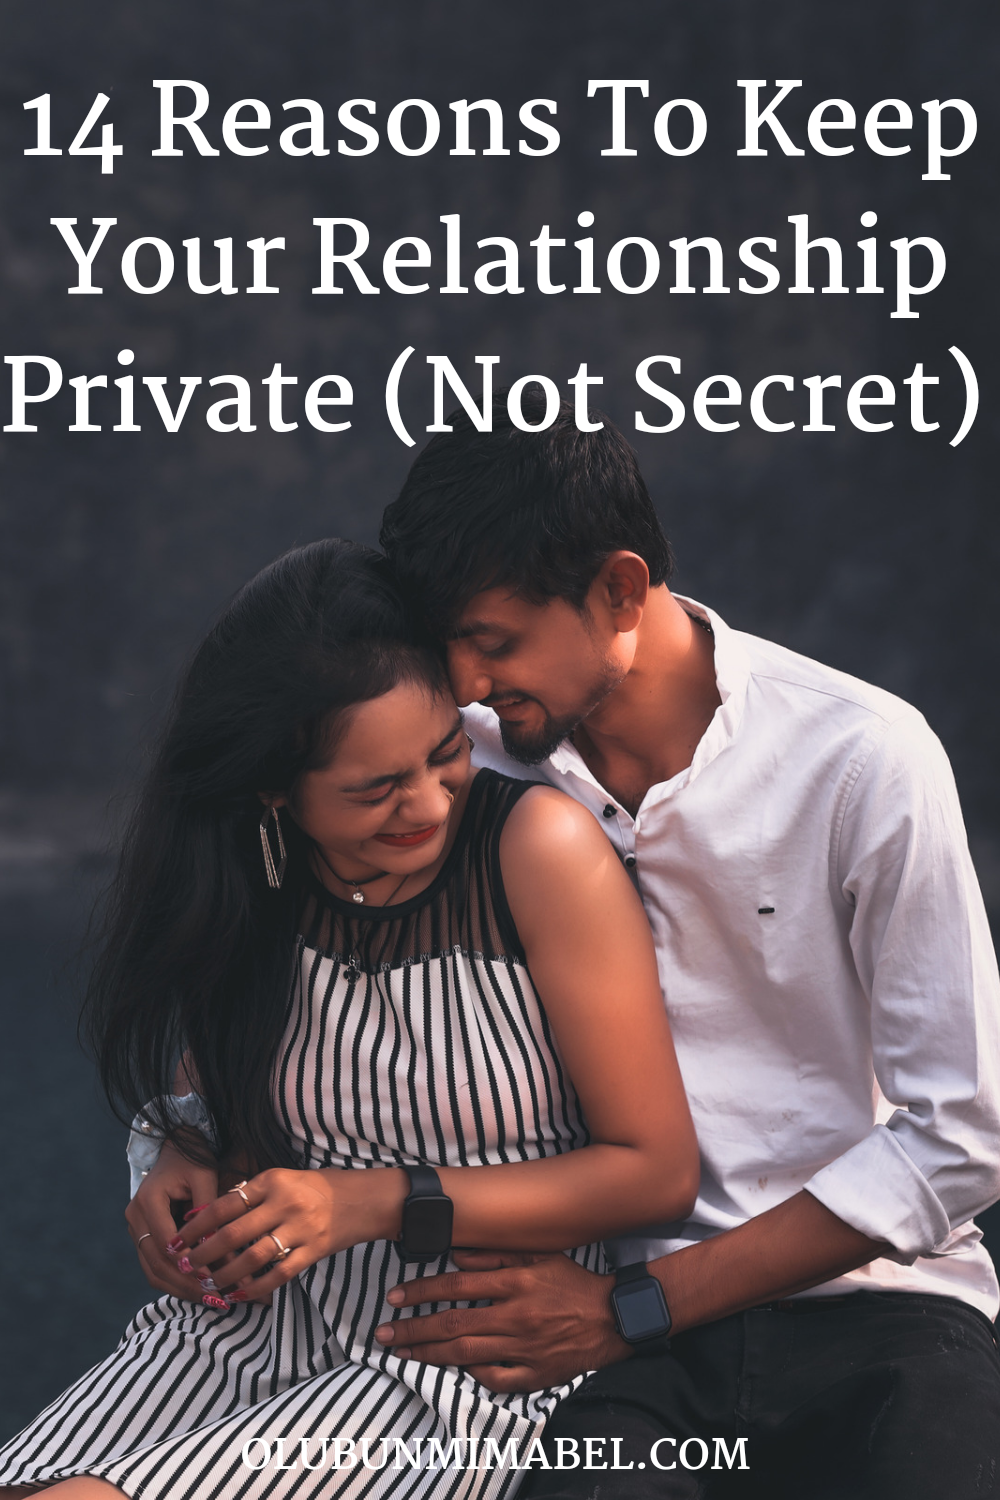 Keep Your Relationship Private Not Secret